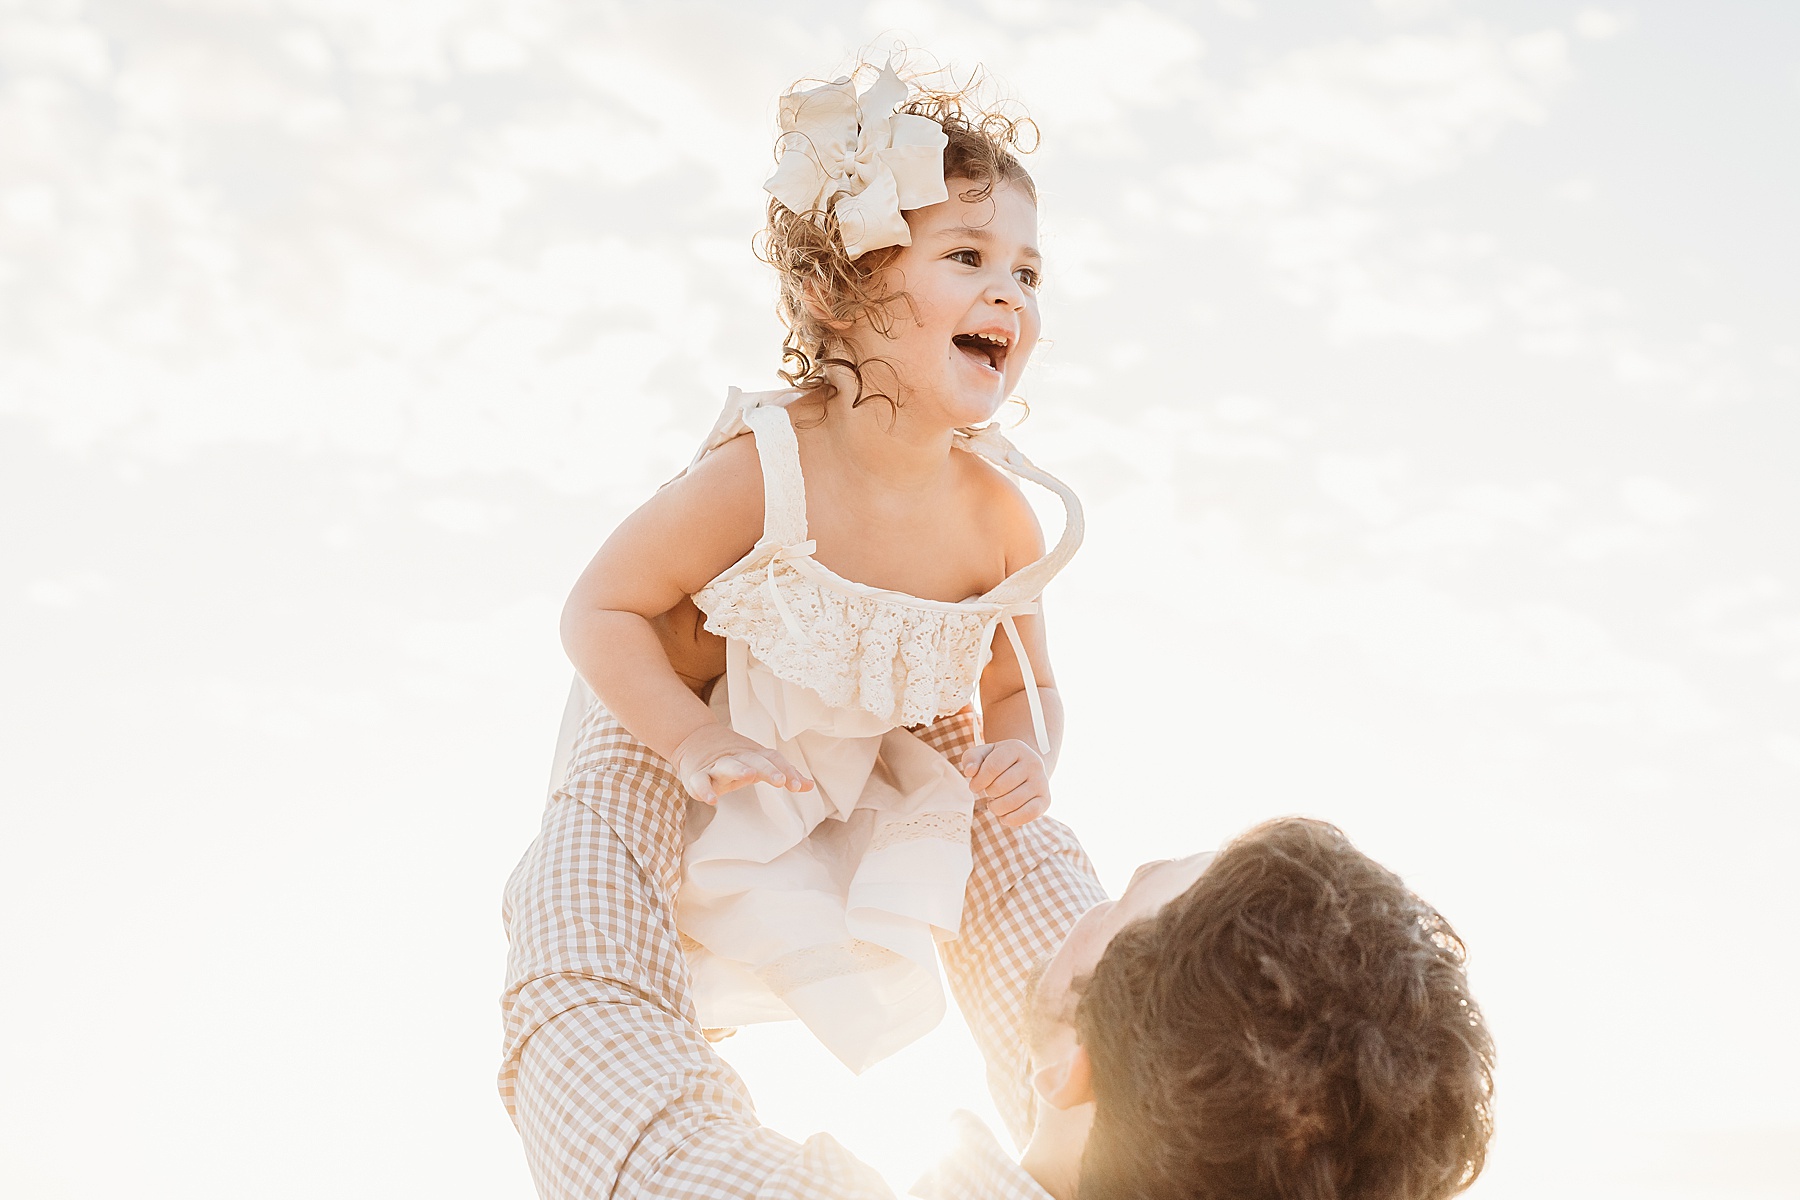 man holding little girl in white dress in the air at sunrise on the beach